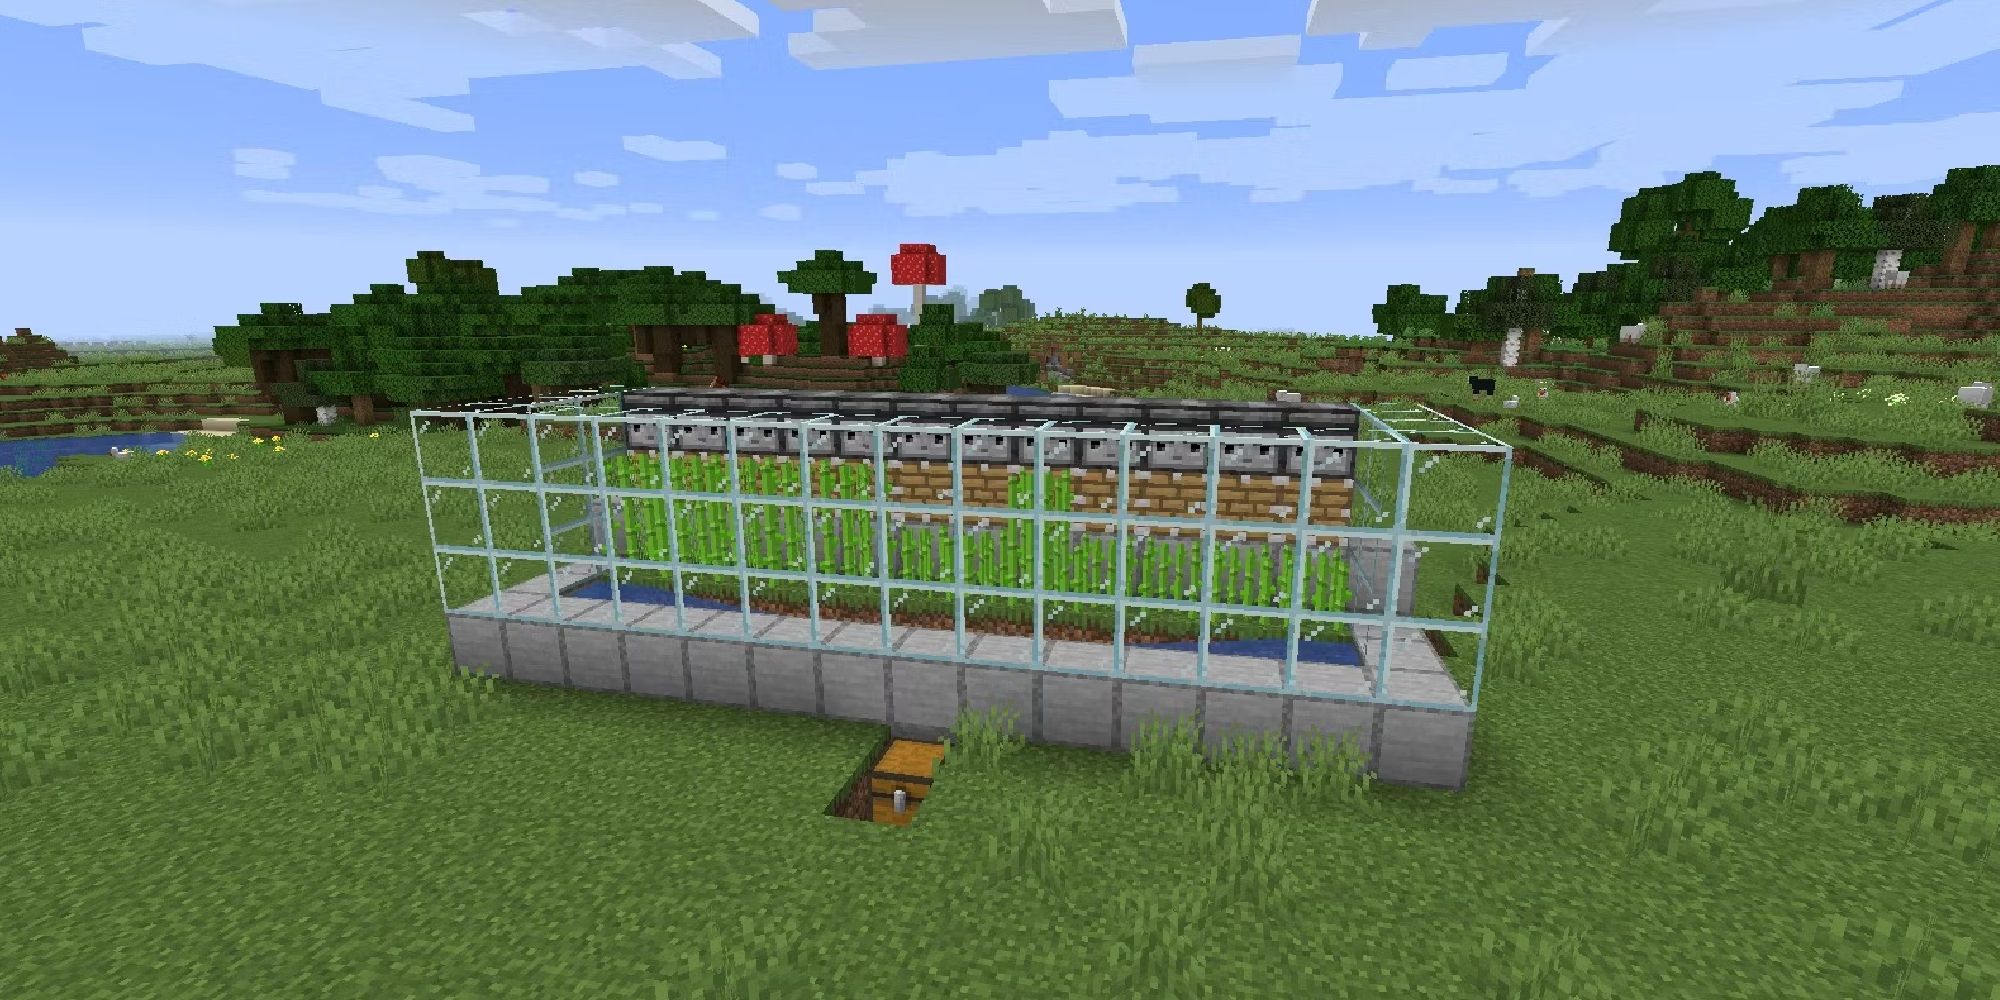 Minecraft Redstone Sugarcane Farm With Glass In A Meadow Biome